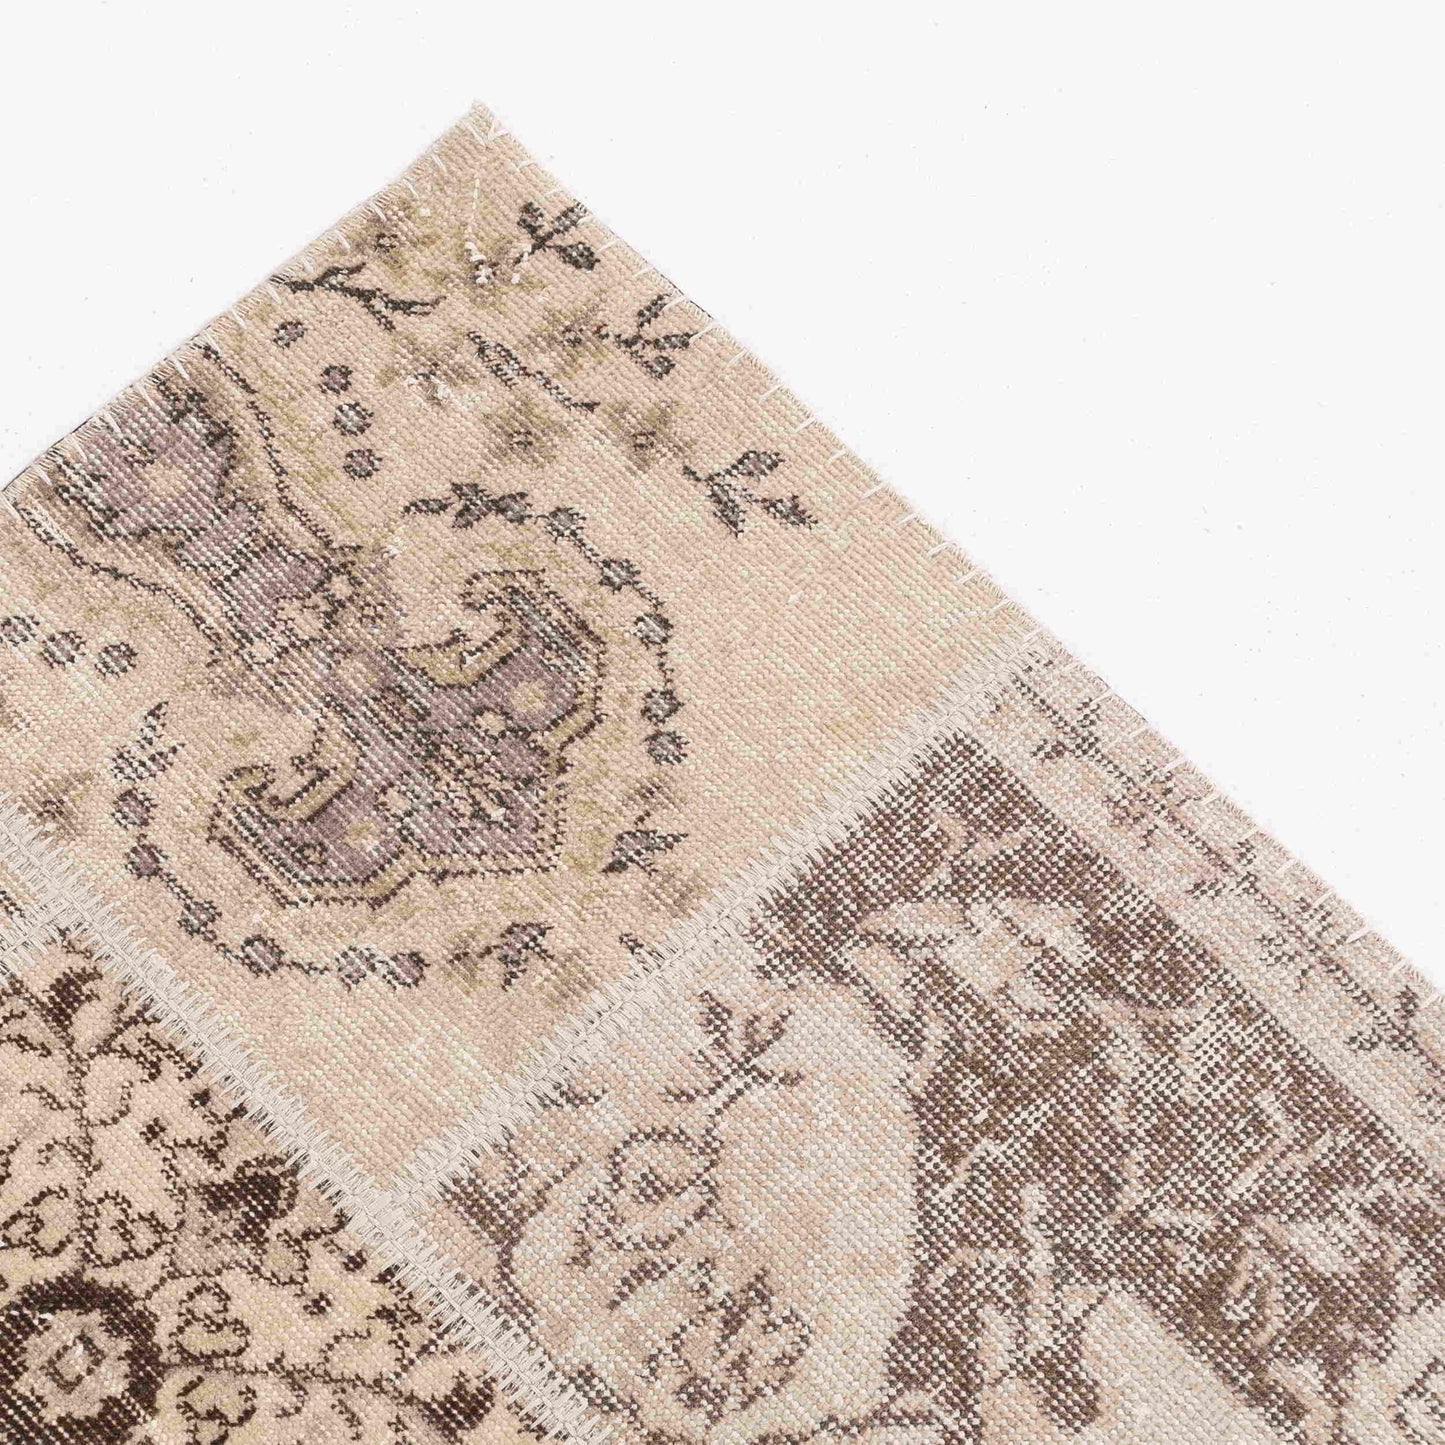 Oriental Rug Patchwork Hand Knotted Wool On Wool 76 x 212 Cm – 2' 6'' x 7' Sand C007 ER01